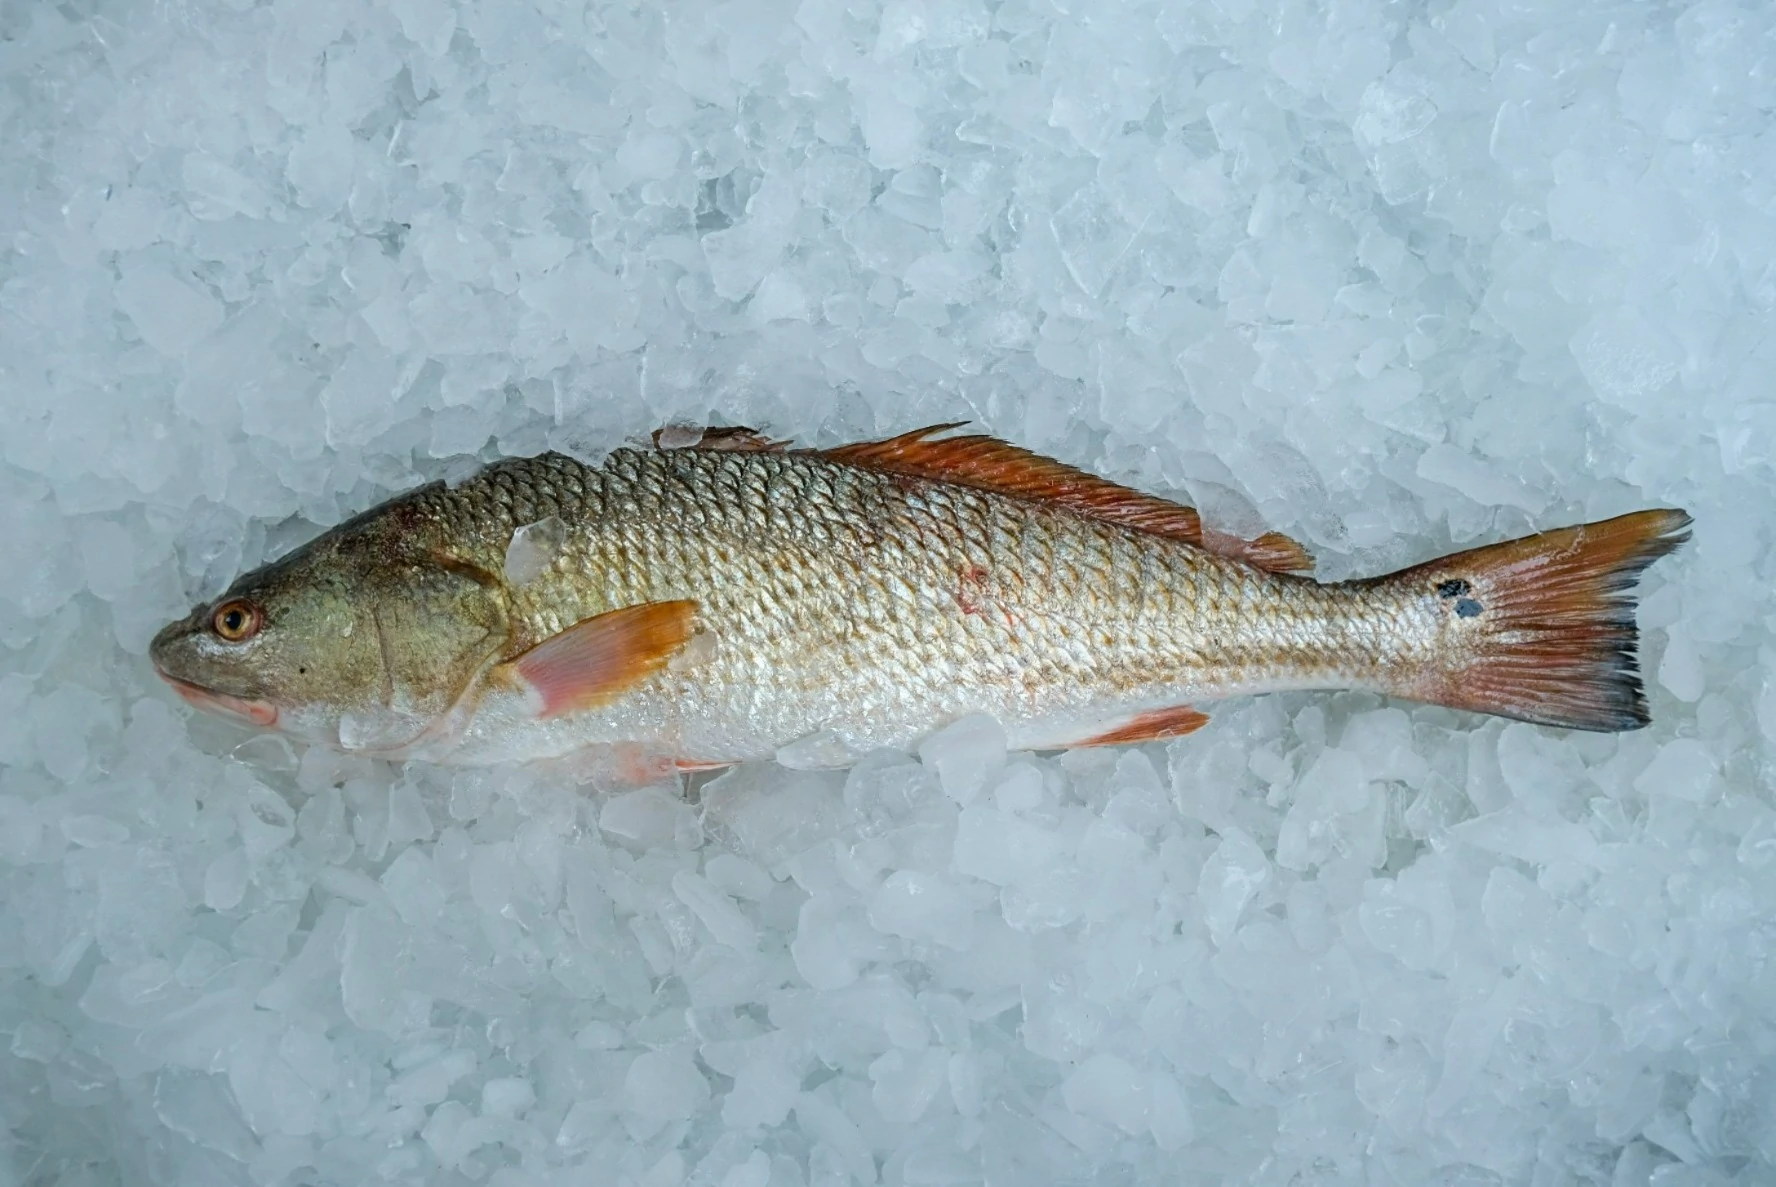 https://vbseafood.com/wp-content/uploads/2022/05/red-drum-fish_virginia-beach-seafood-b2.webp